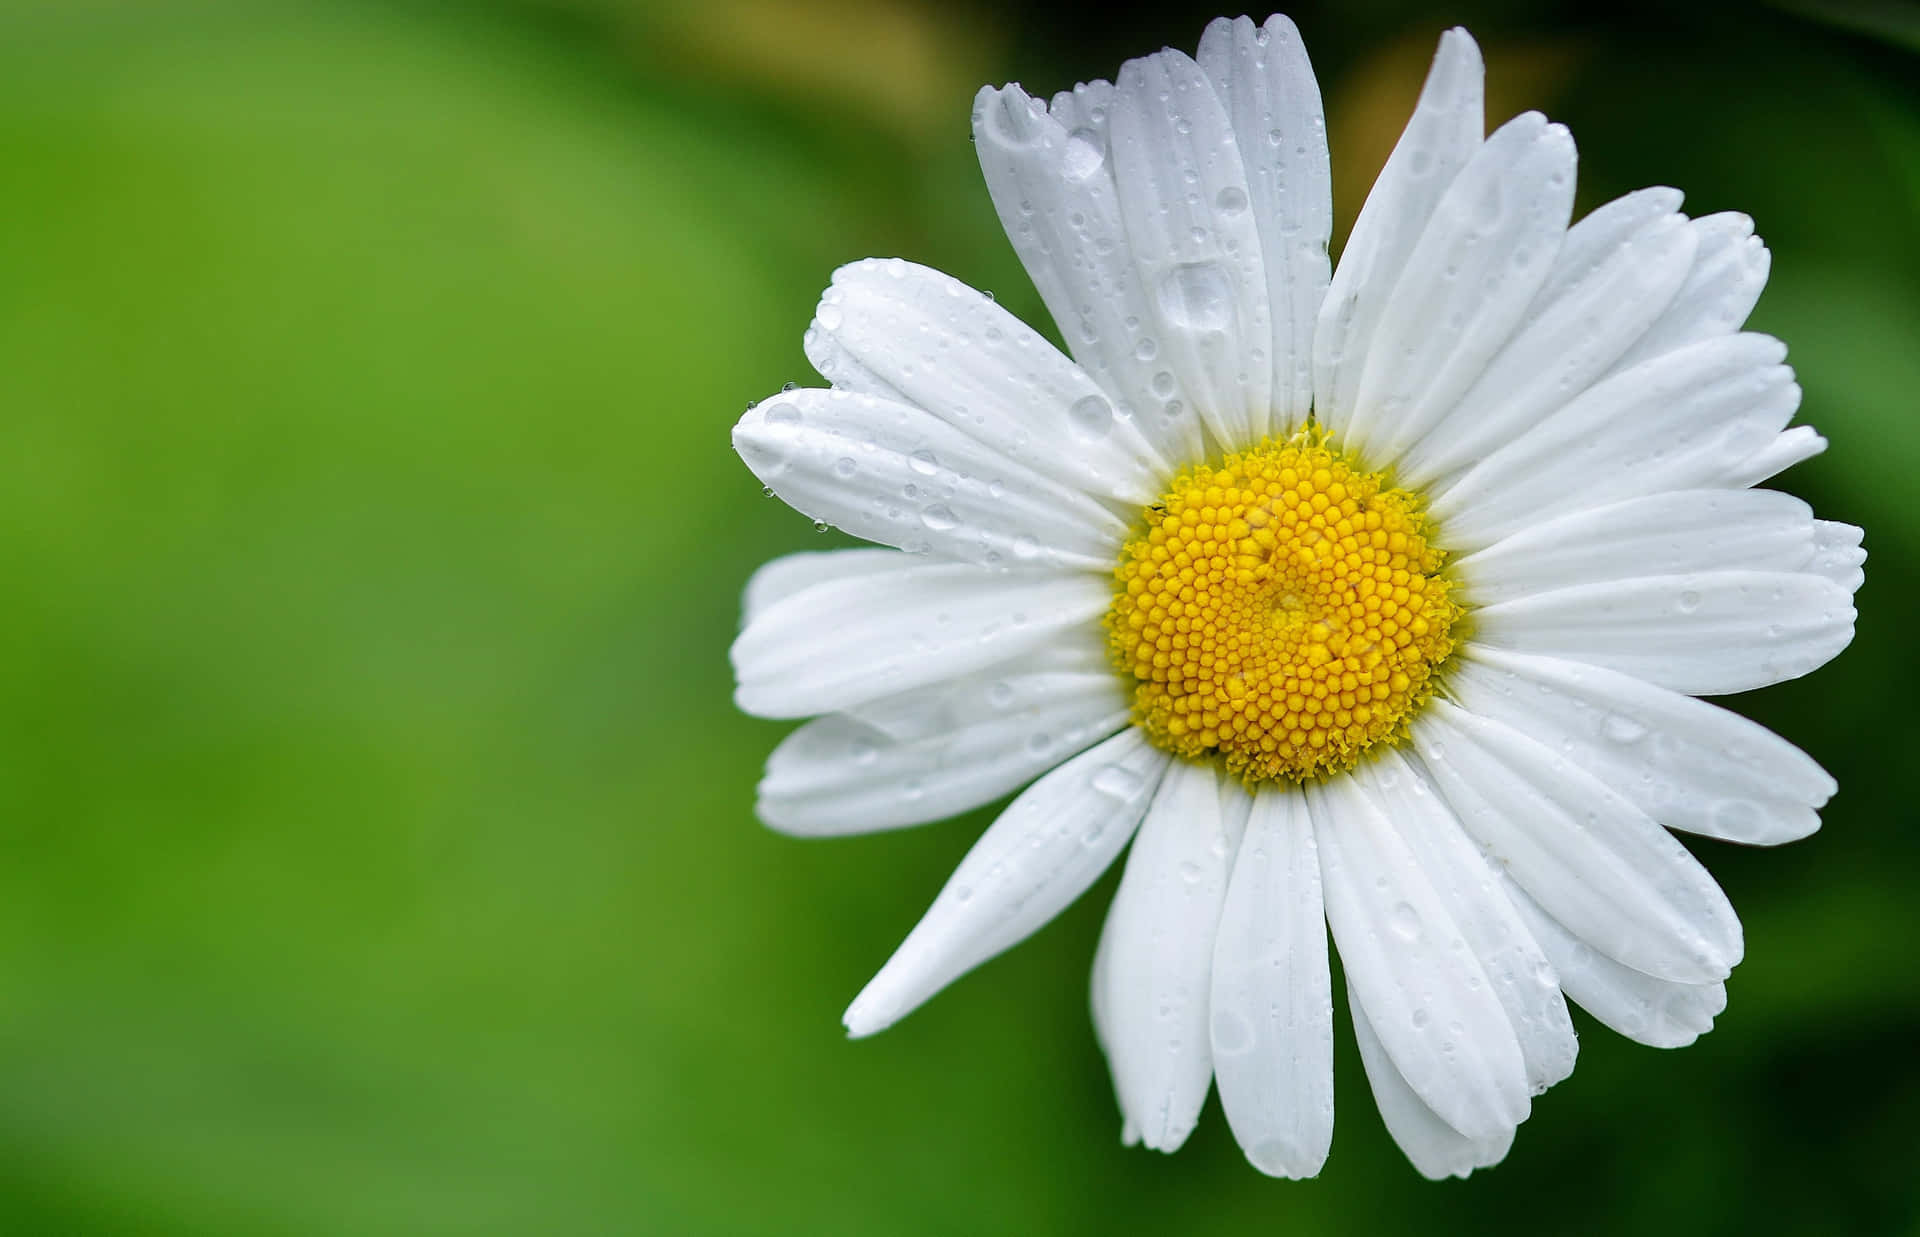 Image  A close up of a daisy - symbolizing beauty, innocence and purity